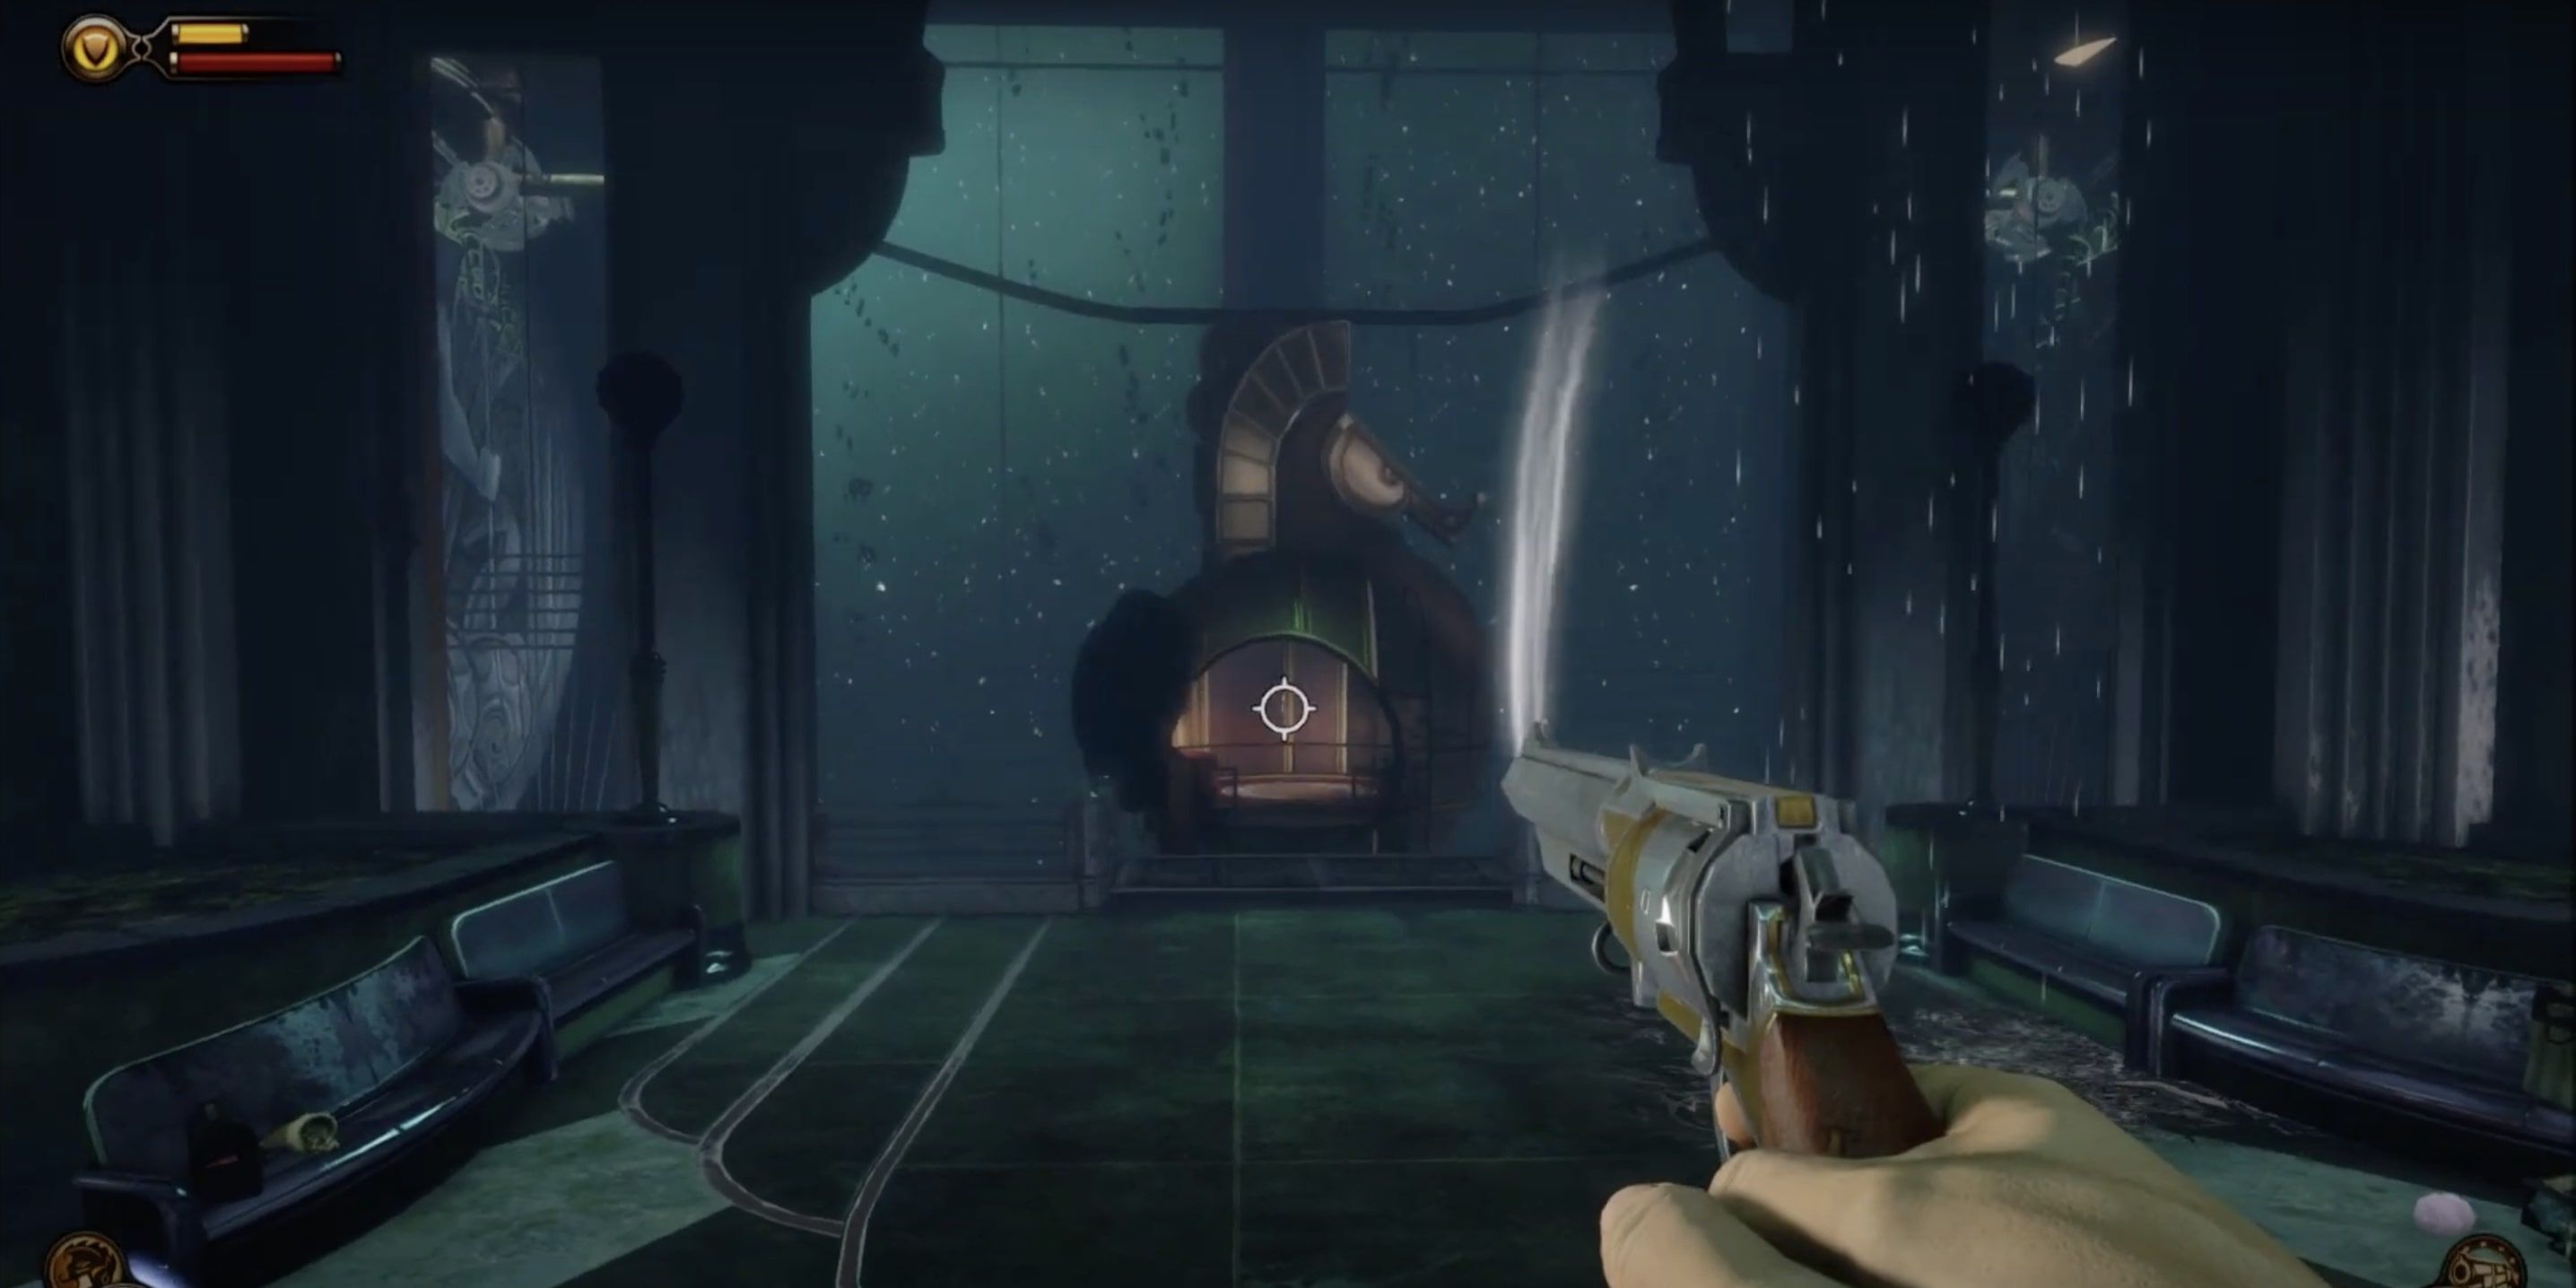 Bioshock Infinite Weapons Hand Cannon Still Burial at Sea DLC